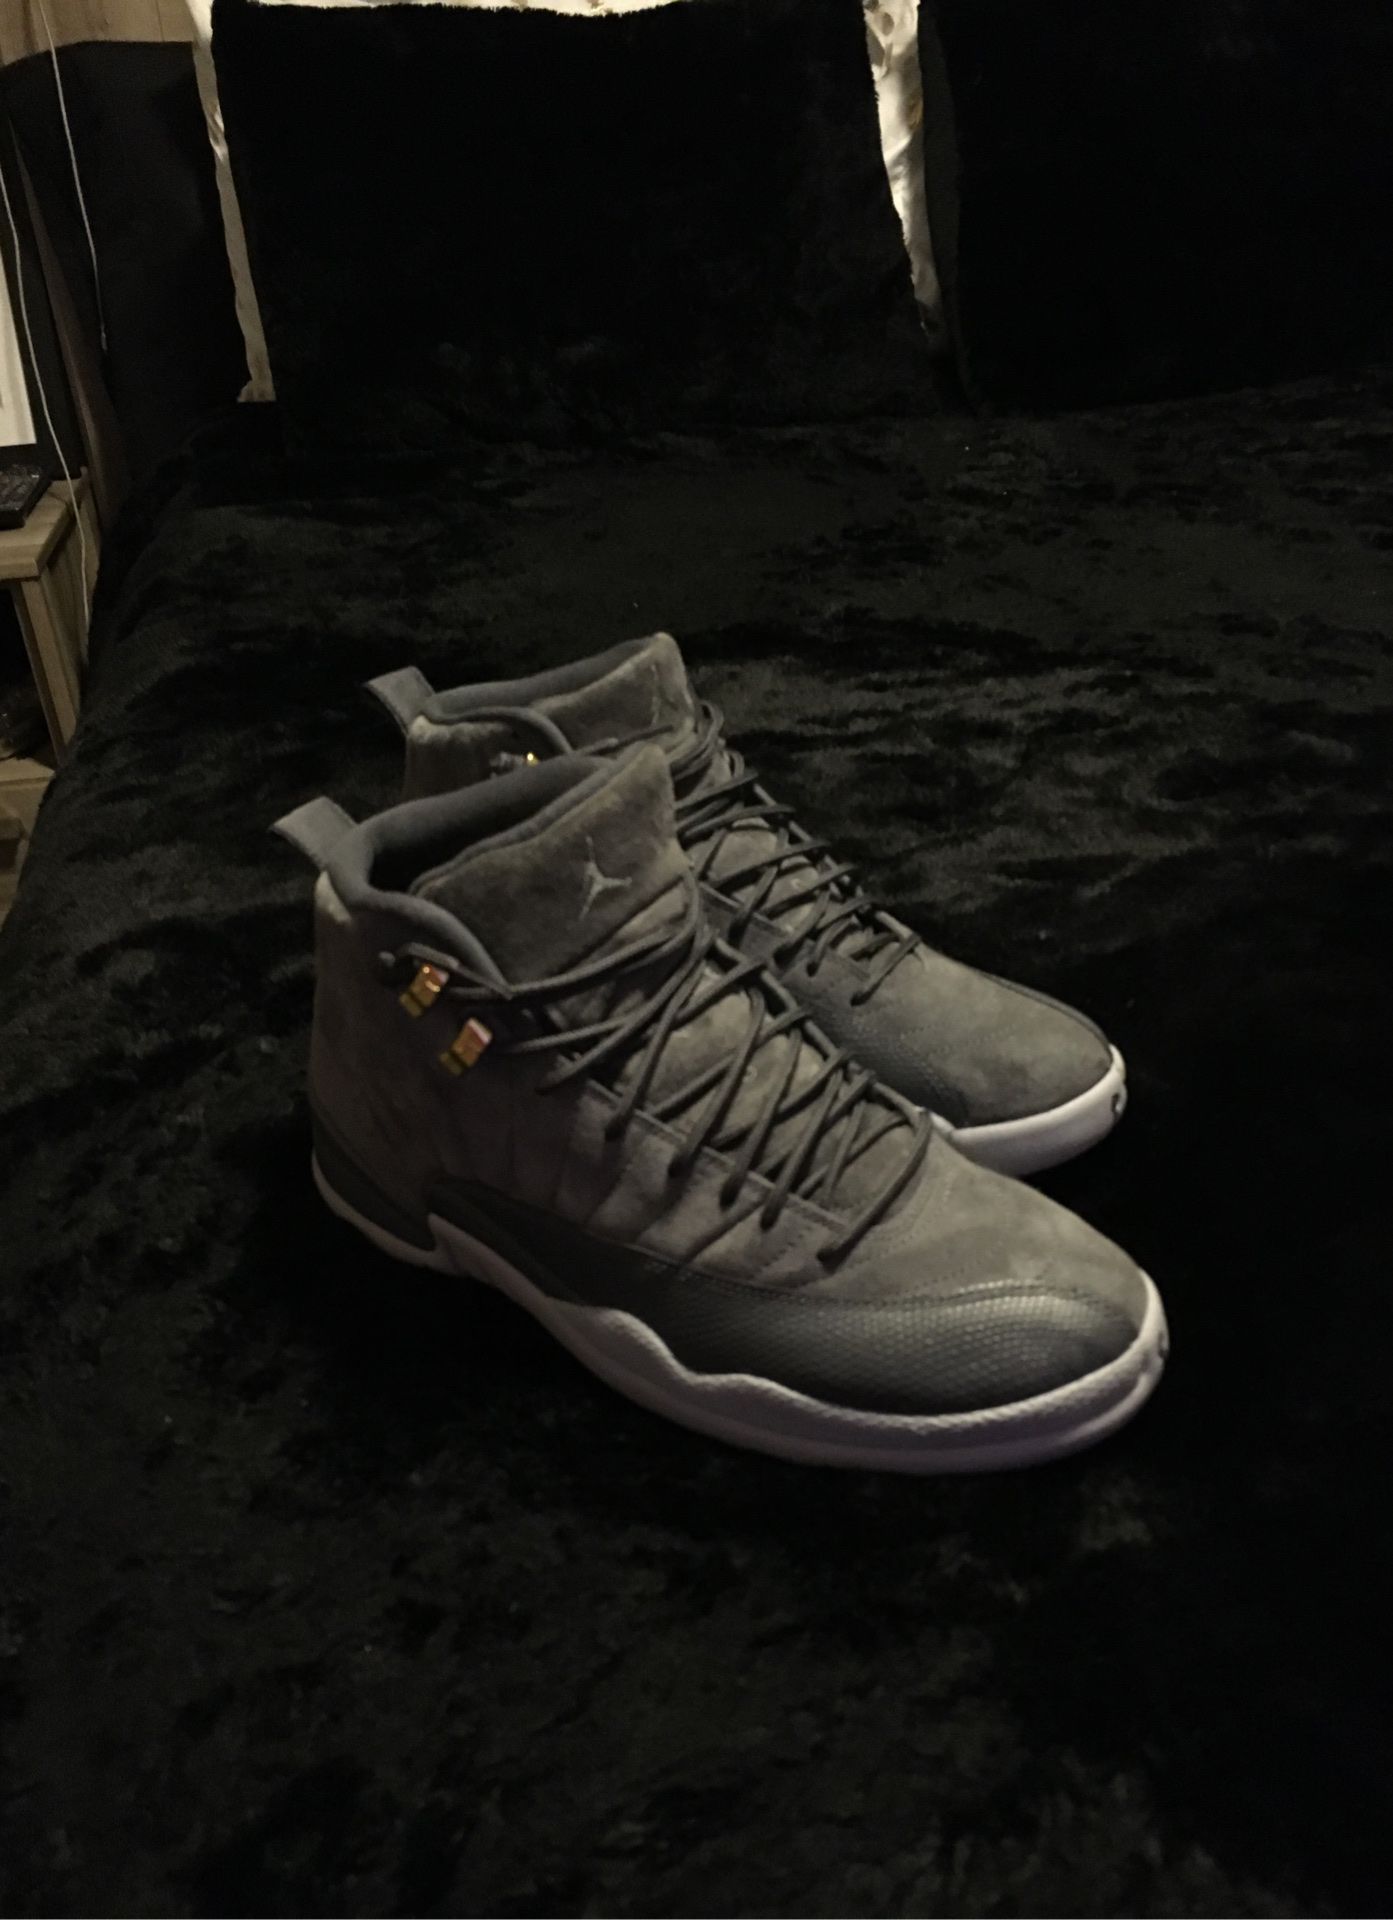 Wolf grey Jordan 12s size 10 I want to trade for a 10.5 Jordan let’s see what y’all got!!